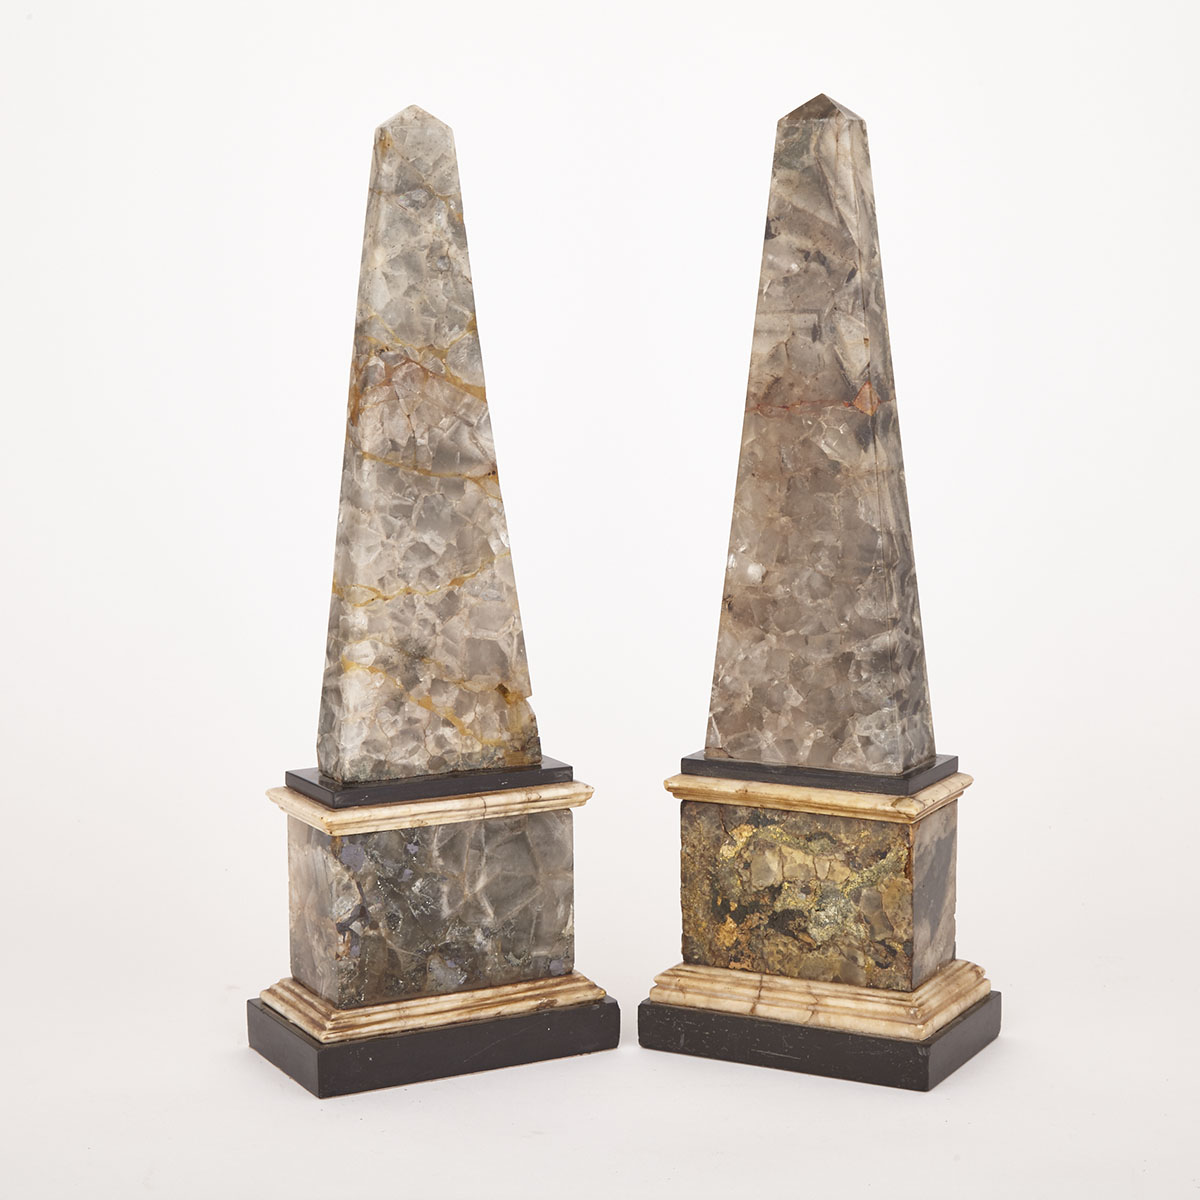 Pair of George III Derbyshire Spar ‘Blue John’ and Marble Obelisks, early 19th century